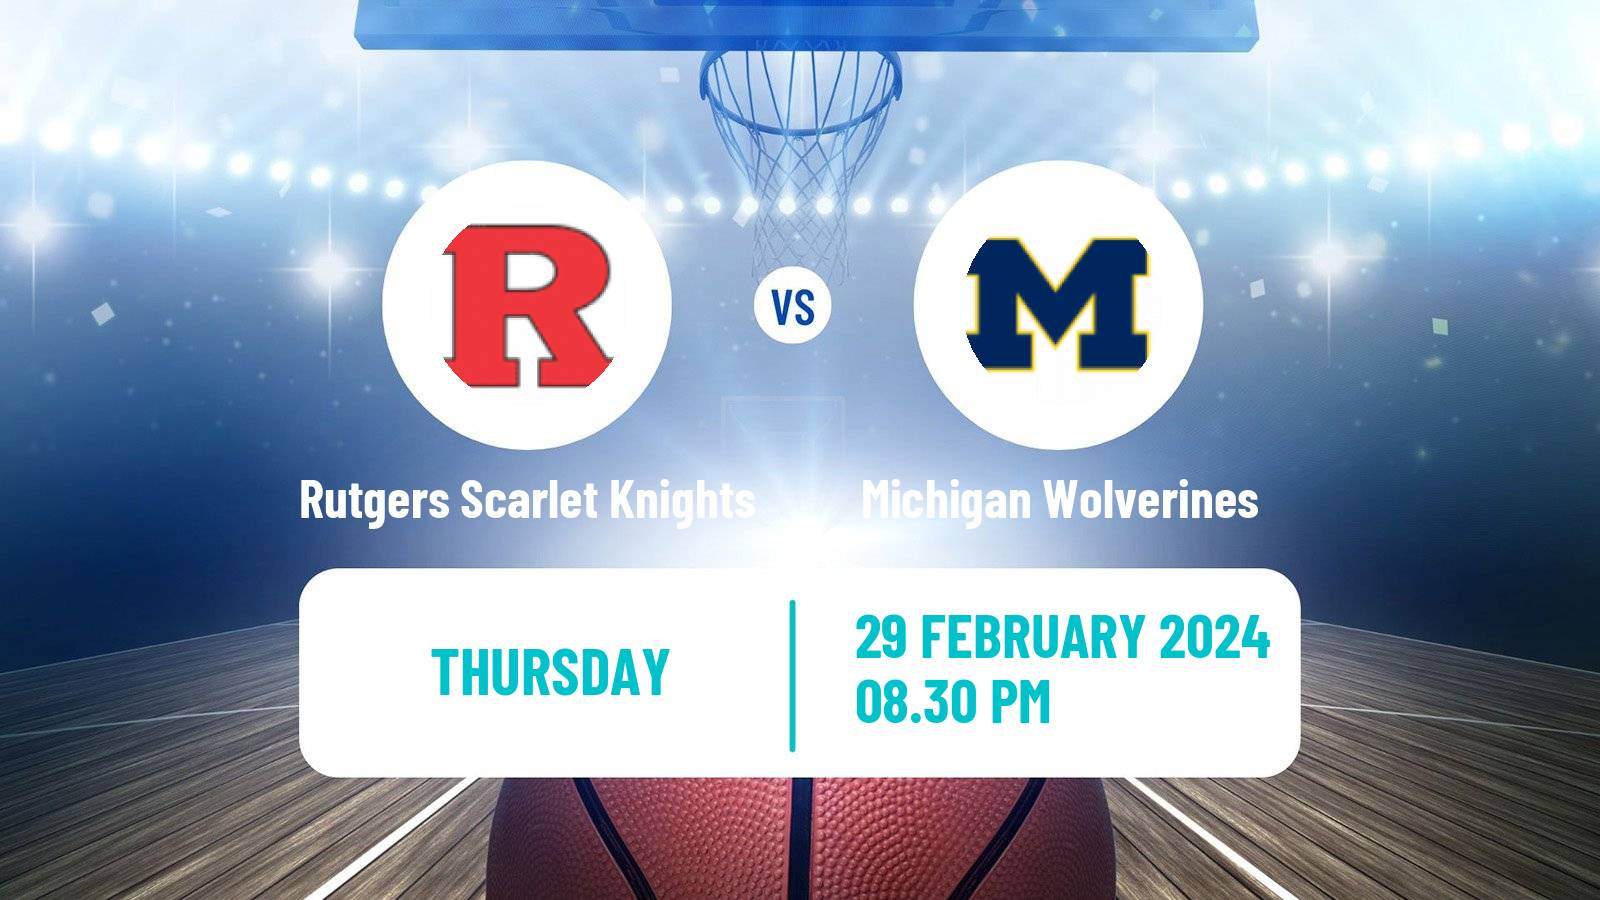 Basketball NCAA College Basketball Rutgers Scarlet Knights - Michigan Wolverines